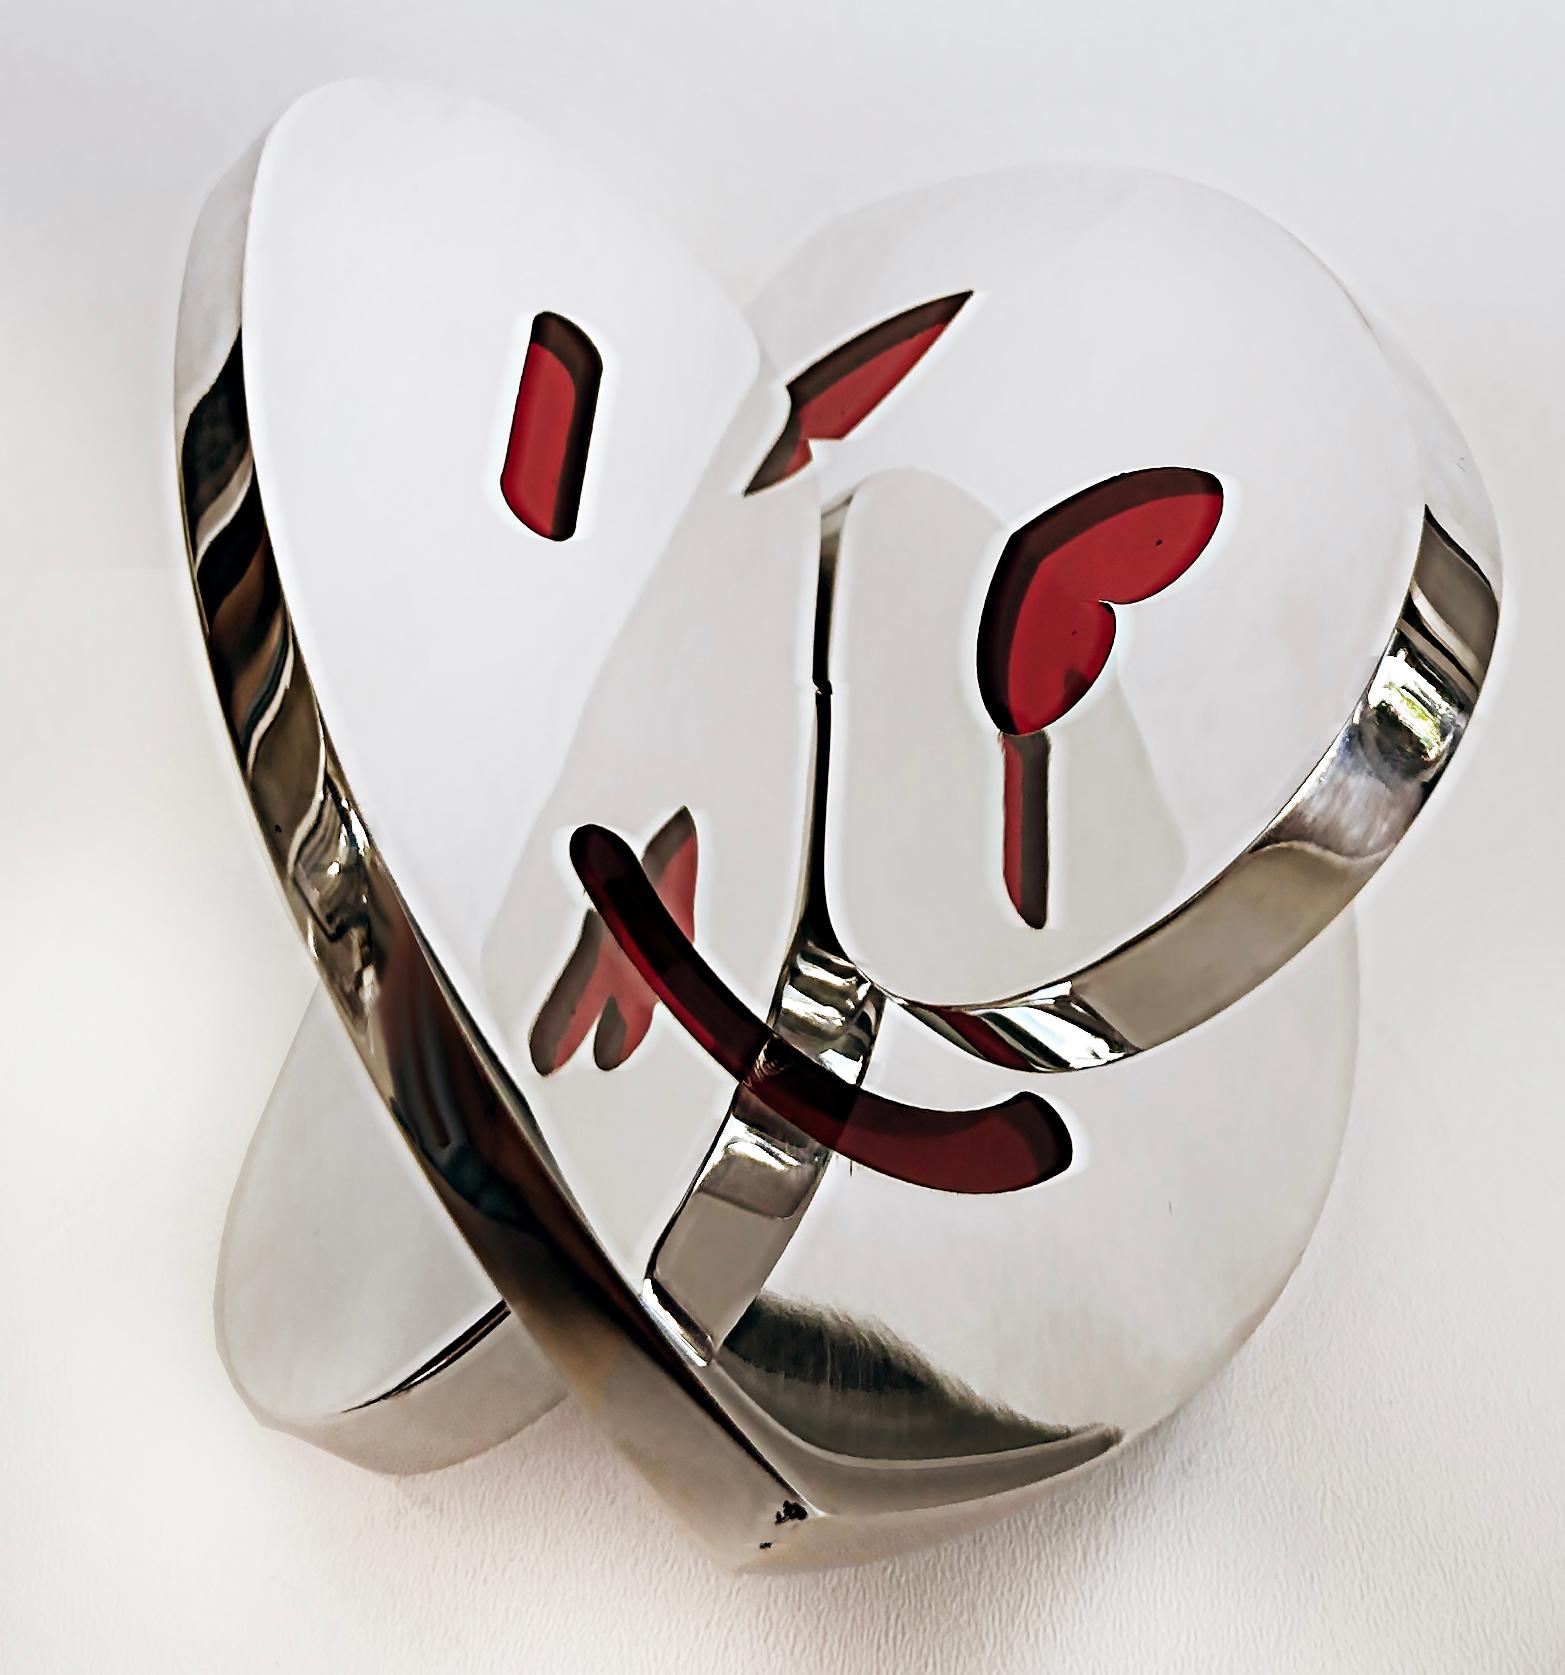 Modern Polished Aluminum Interlocking Hearts Sculpture with Translucent Epoxy Resin For Sale